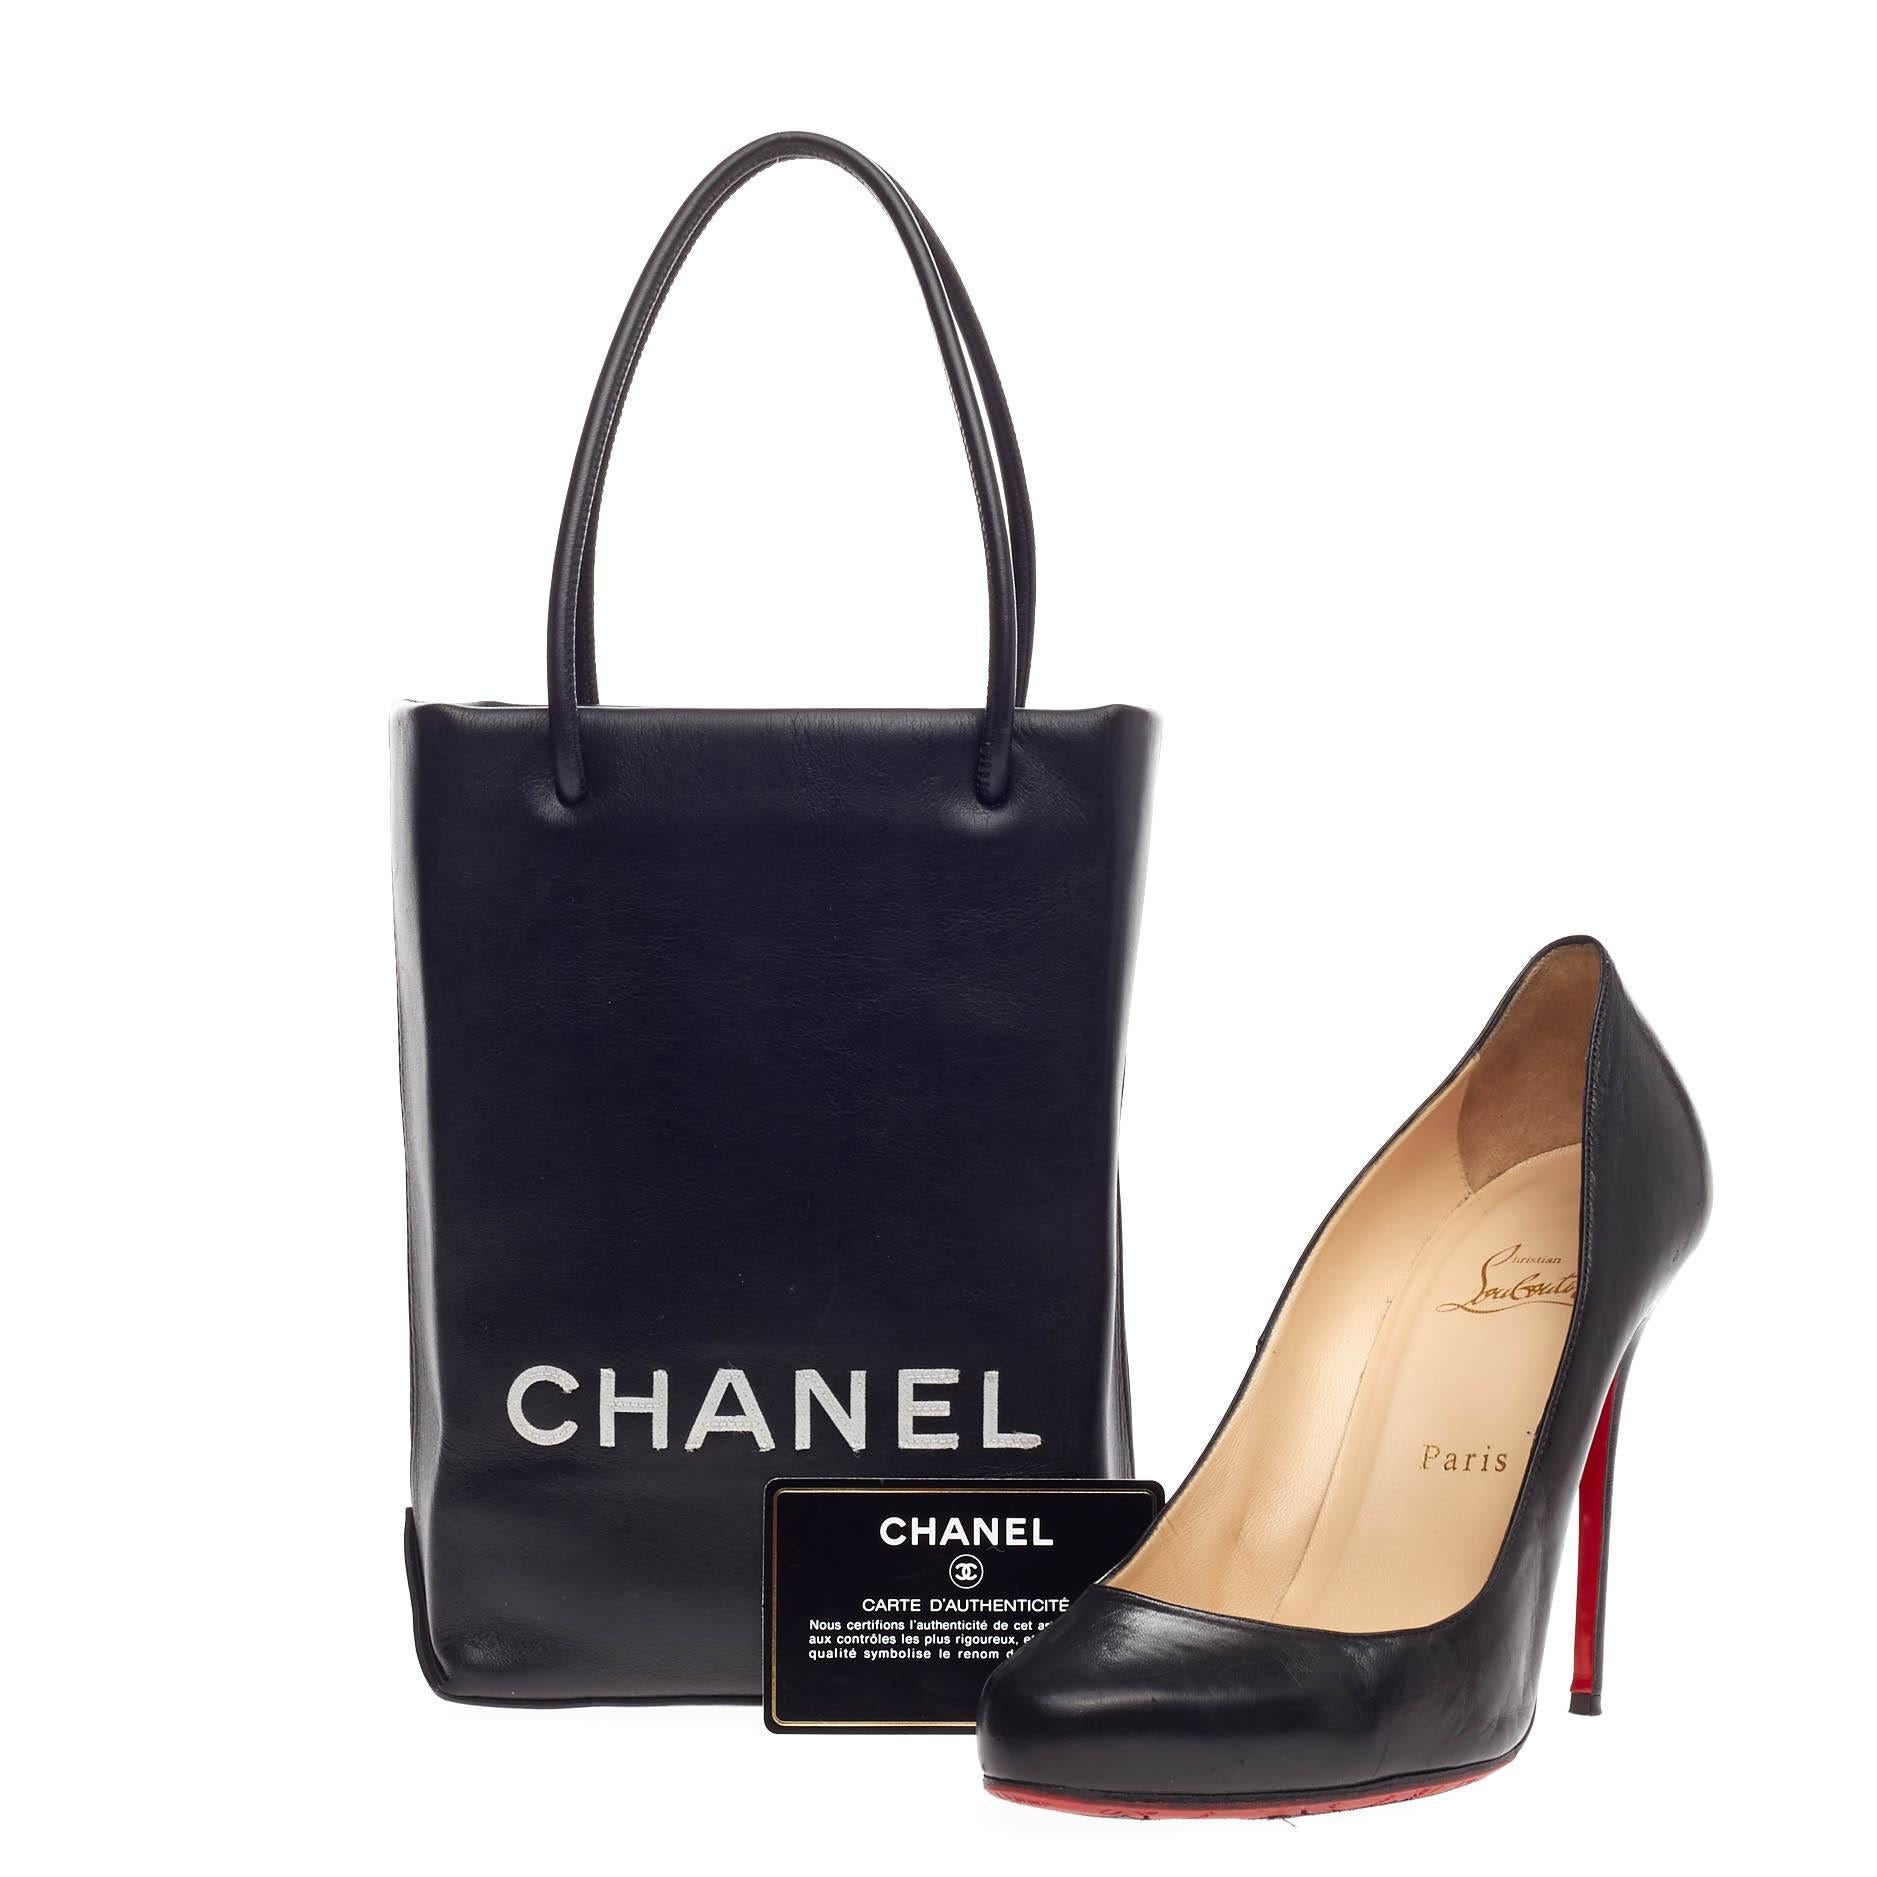 This authentic beautiful Chanel Essential Shopping Tote Leather Small is the perfect petite accessory that compliments any outfit. Crafted from black smooth leather, this miniature handle bag features dual-rolled thin straps, printed Chanel logo at